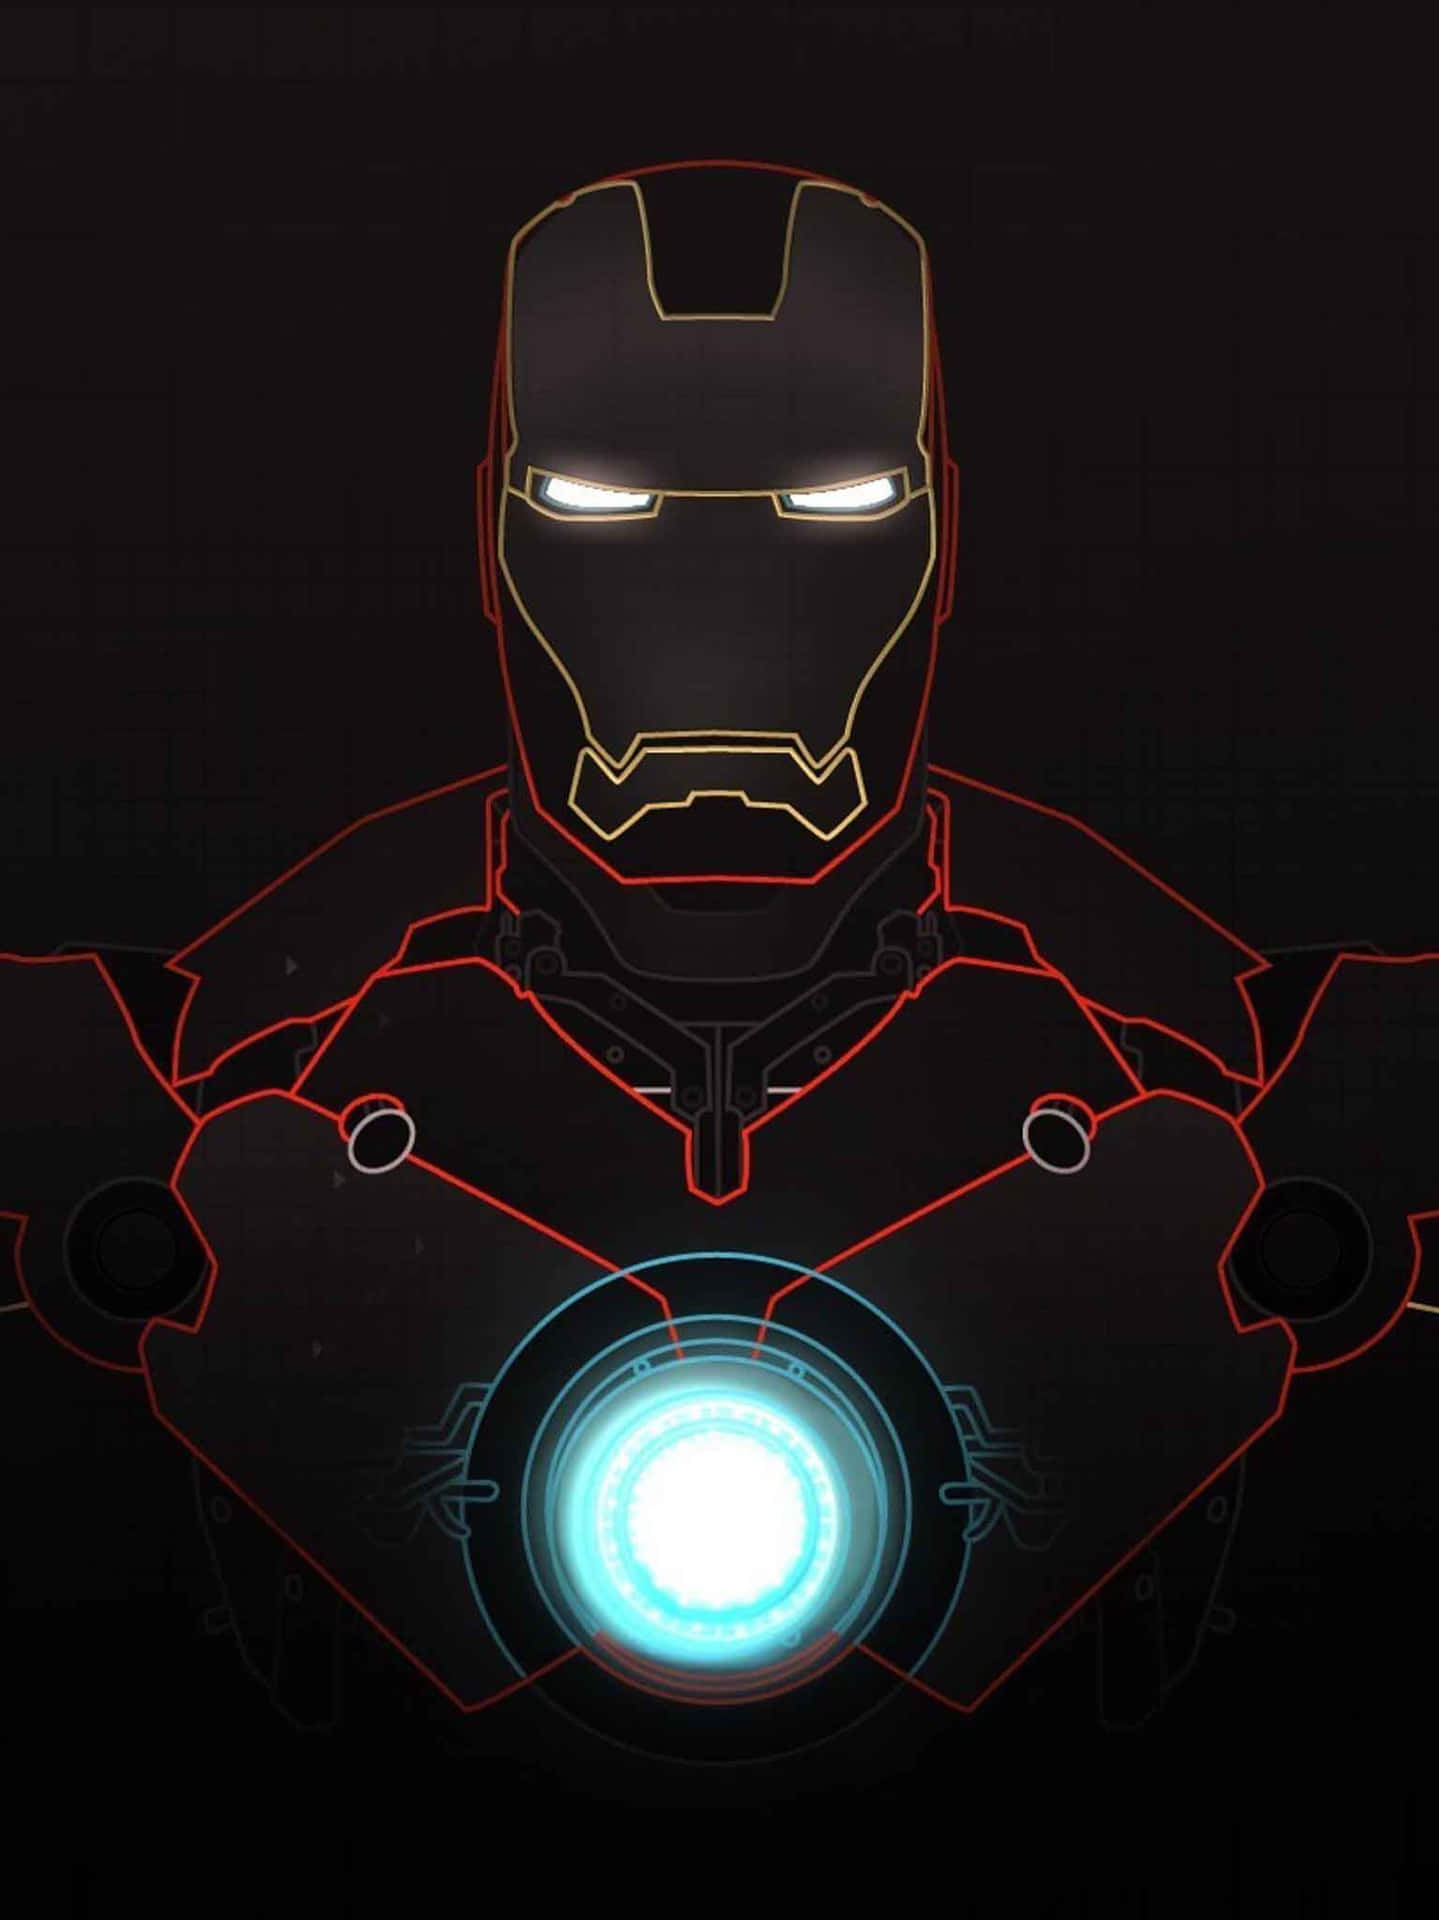 Show your Iron Man fandom by sporting this Iron Man iPhone X. Wallpaper